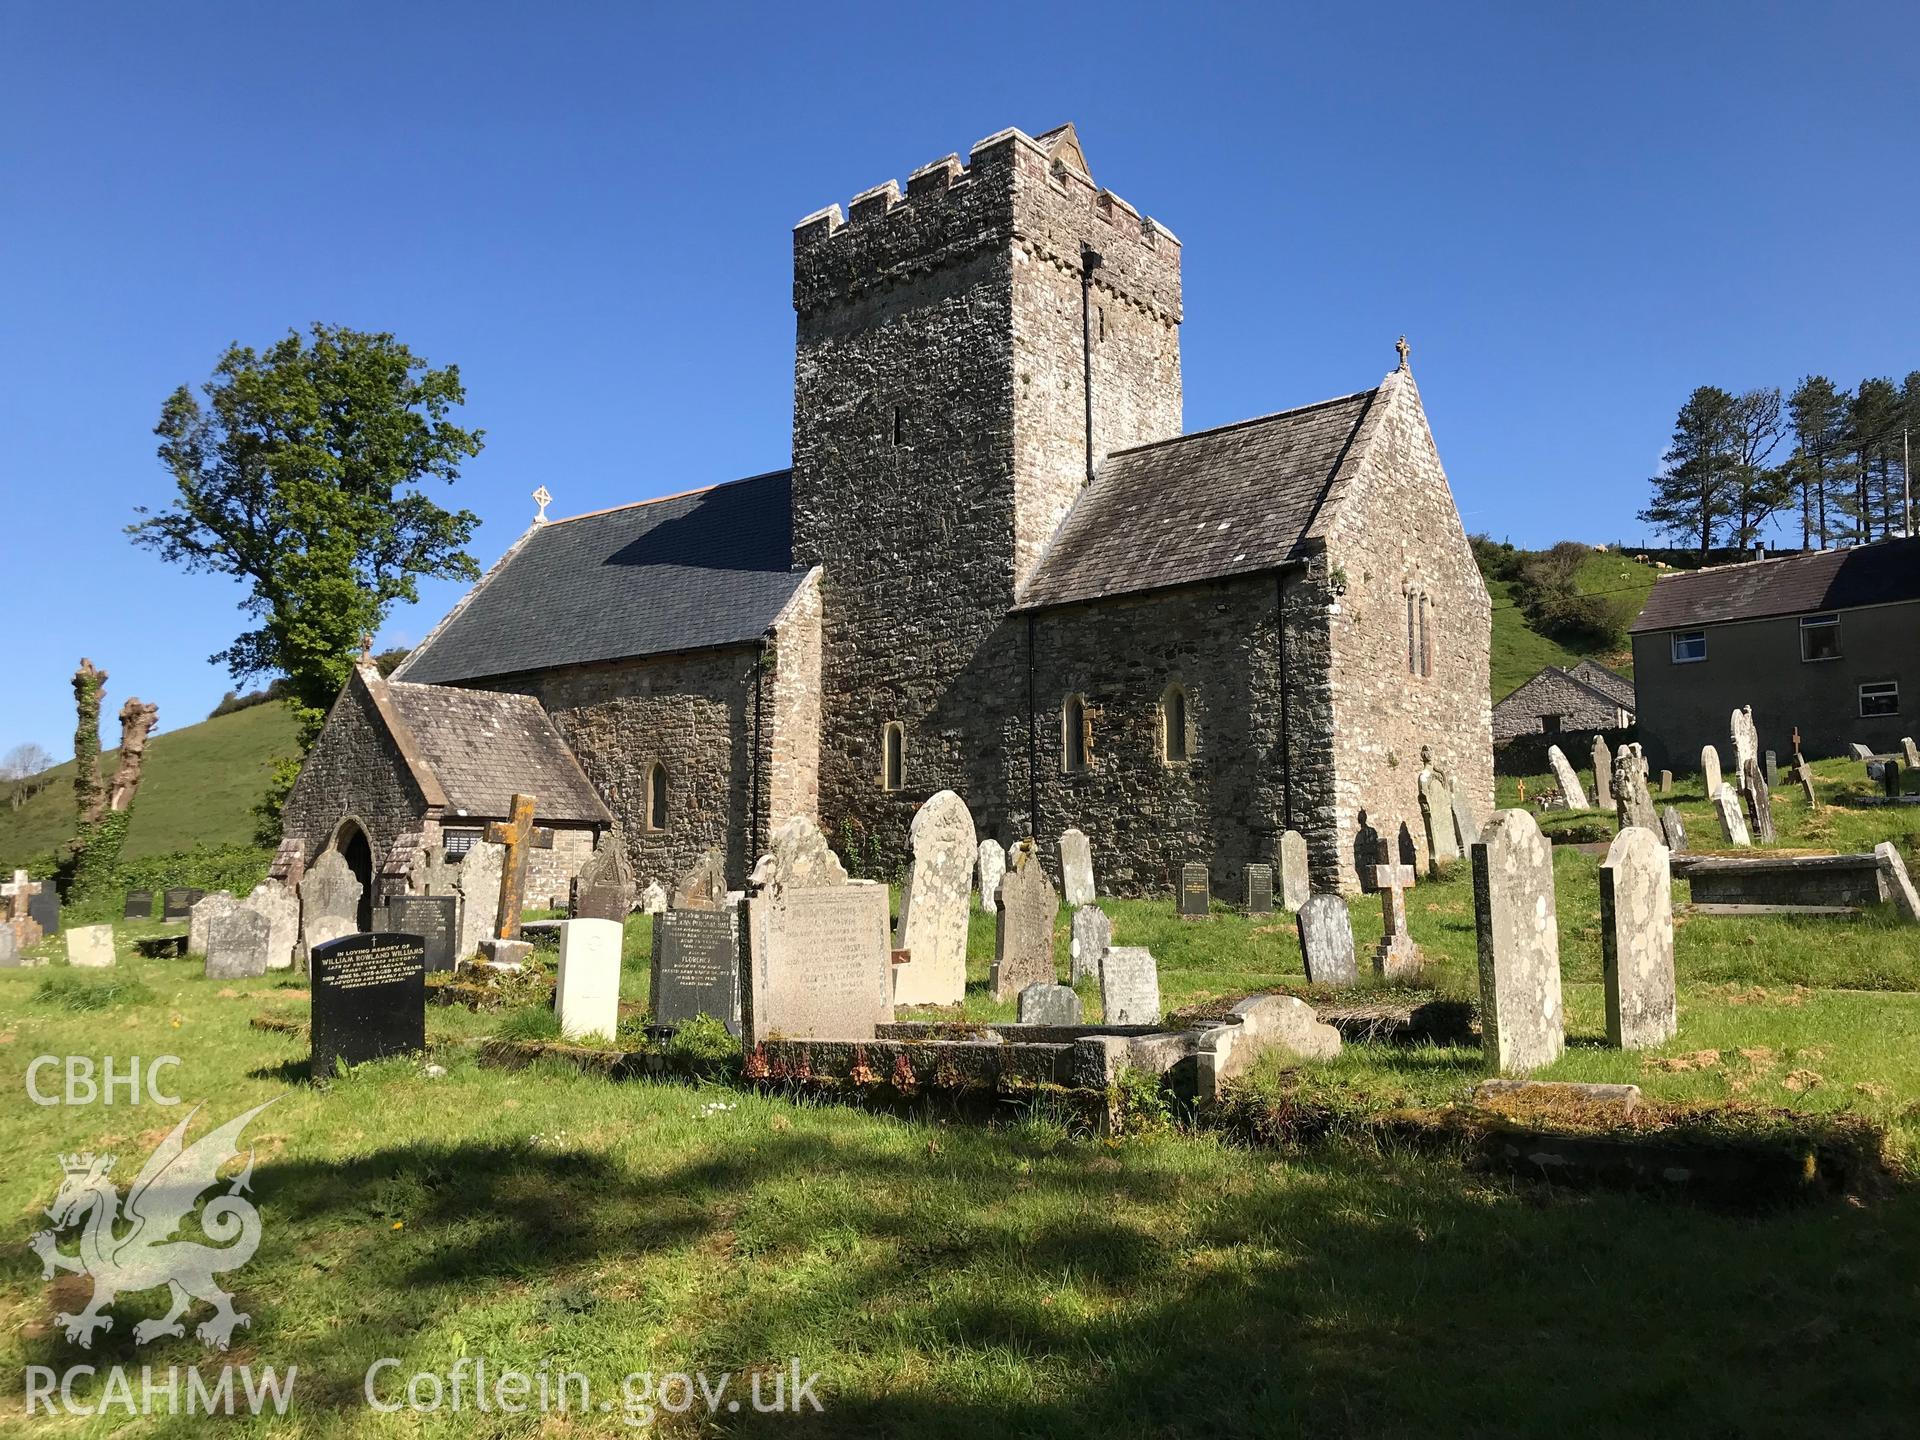 Digital colour photograph showing exterior view of St. Cadog's Church, Cheriton, taken by Paul R. Davis on 5th May 2019.